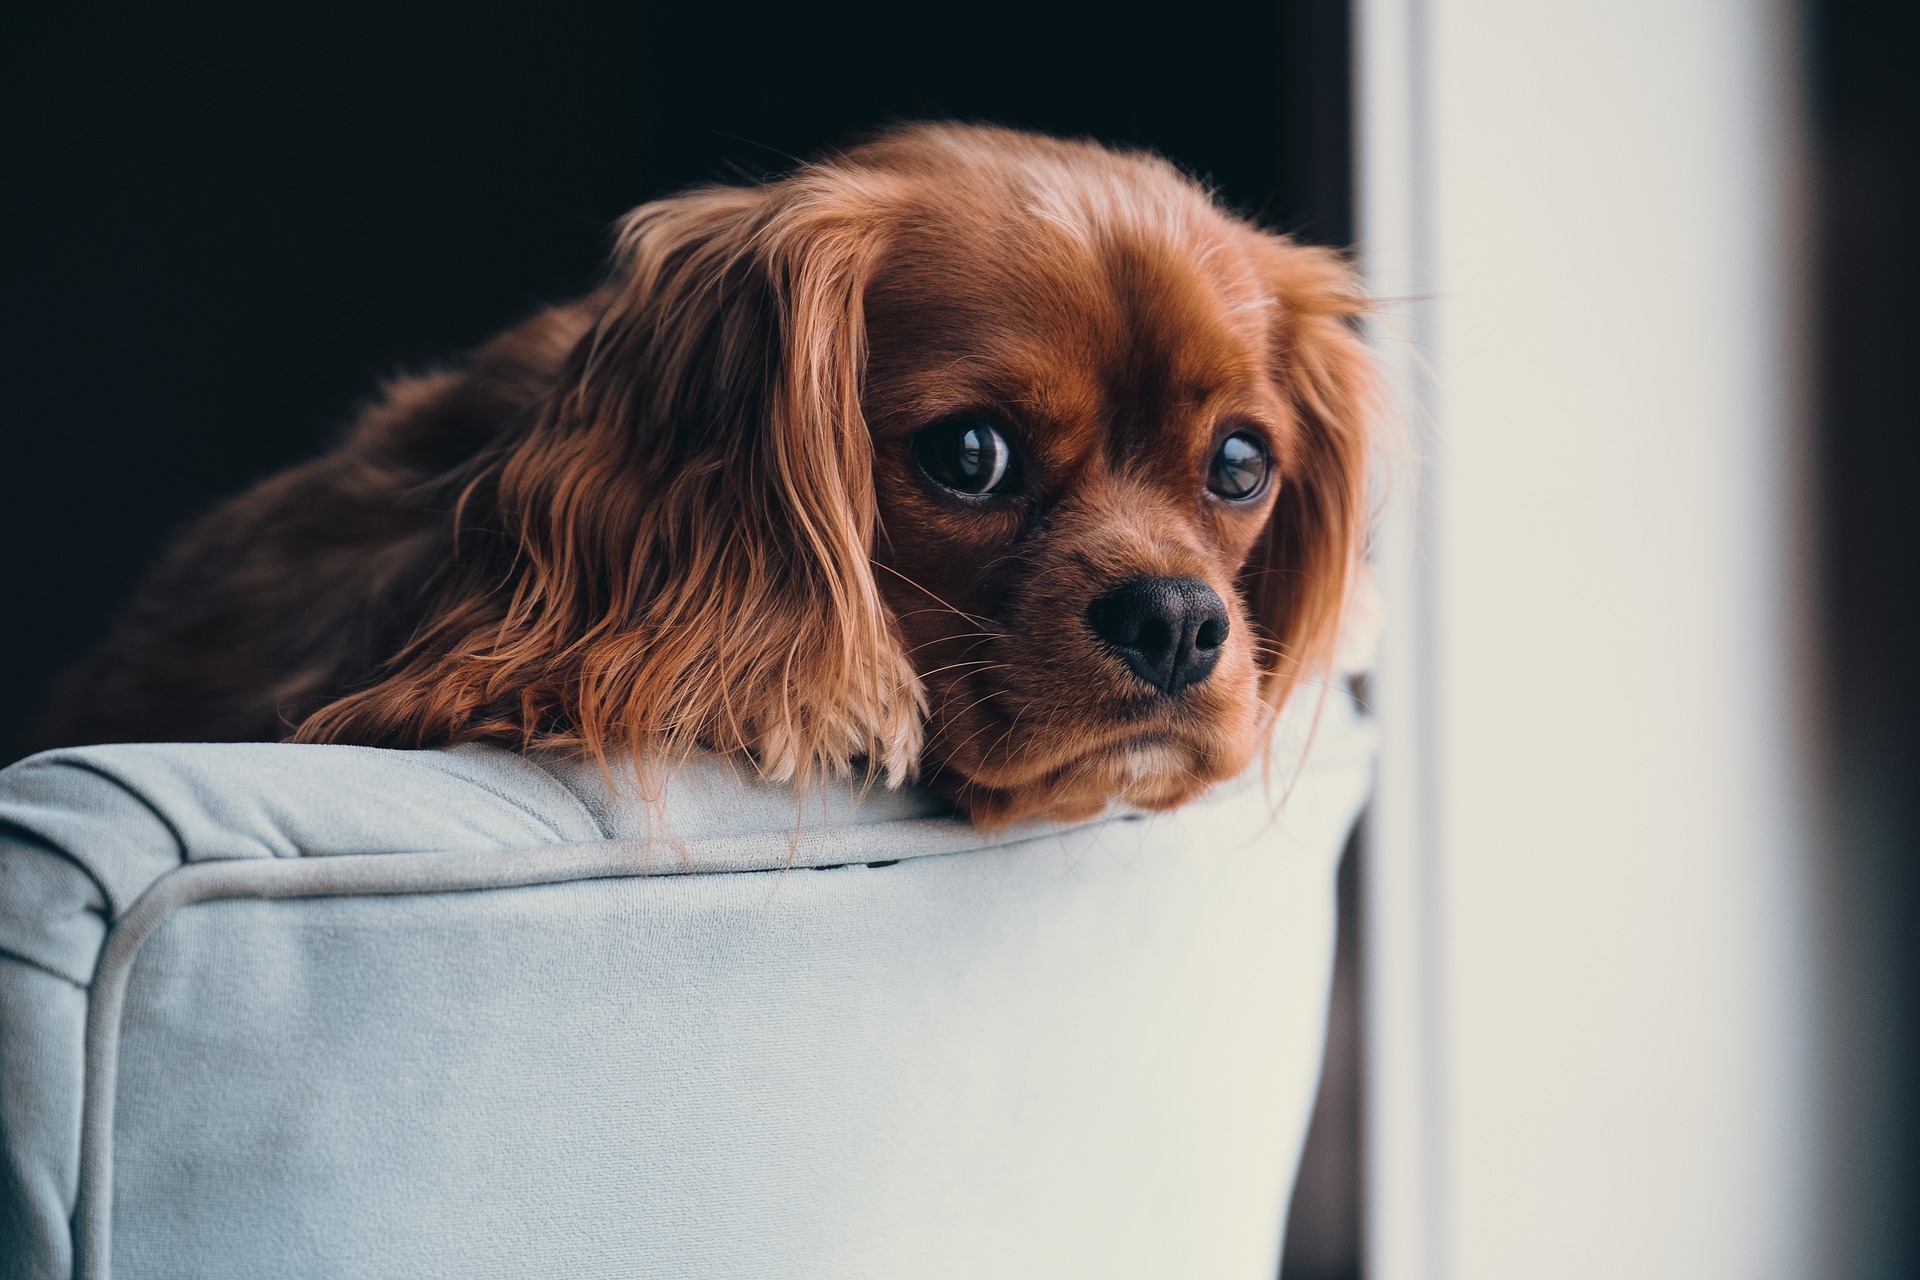 Our Pet Urine & Odor Removal (P.U.R.T) is a revolutionary addition to the carpet & upholstery cleaning industry! Let us help fight the buildup of odors caused by your furriest friends!